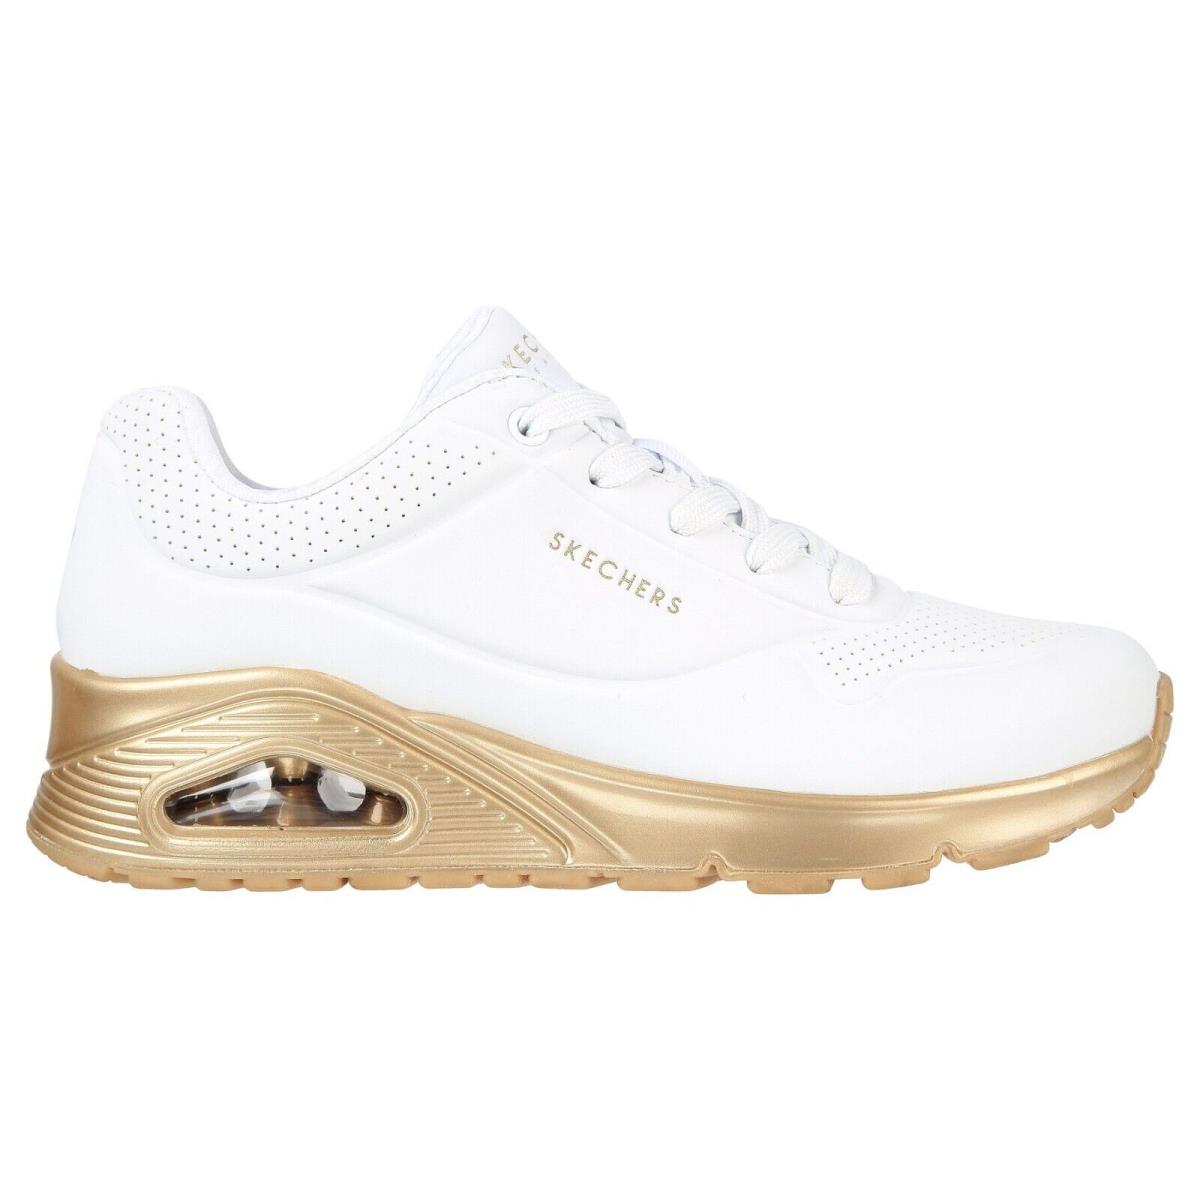 Skechers shoes Uno Gold Soul - White/Gold 4